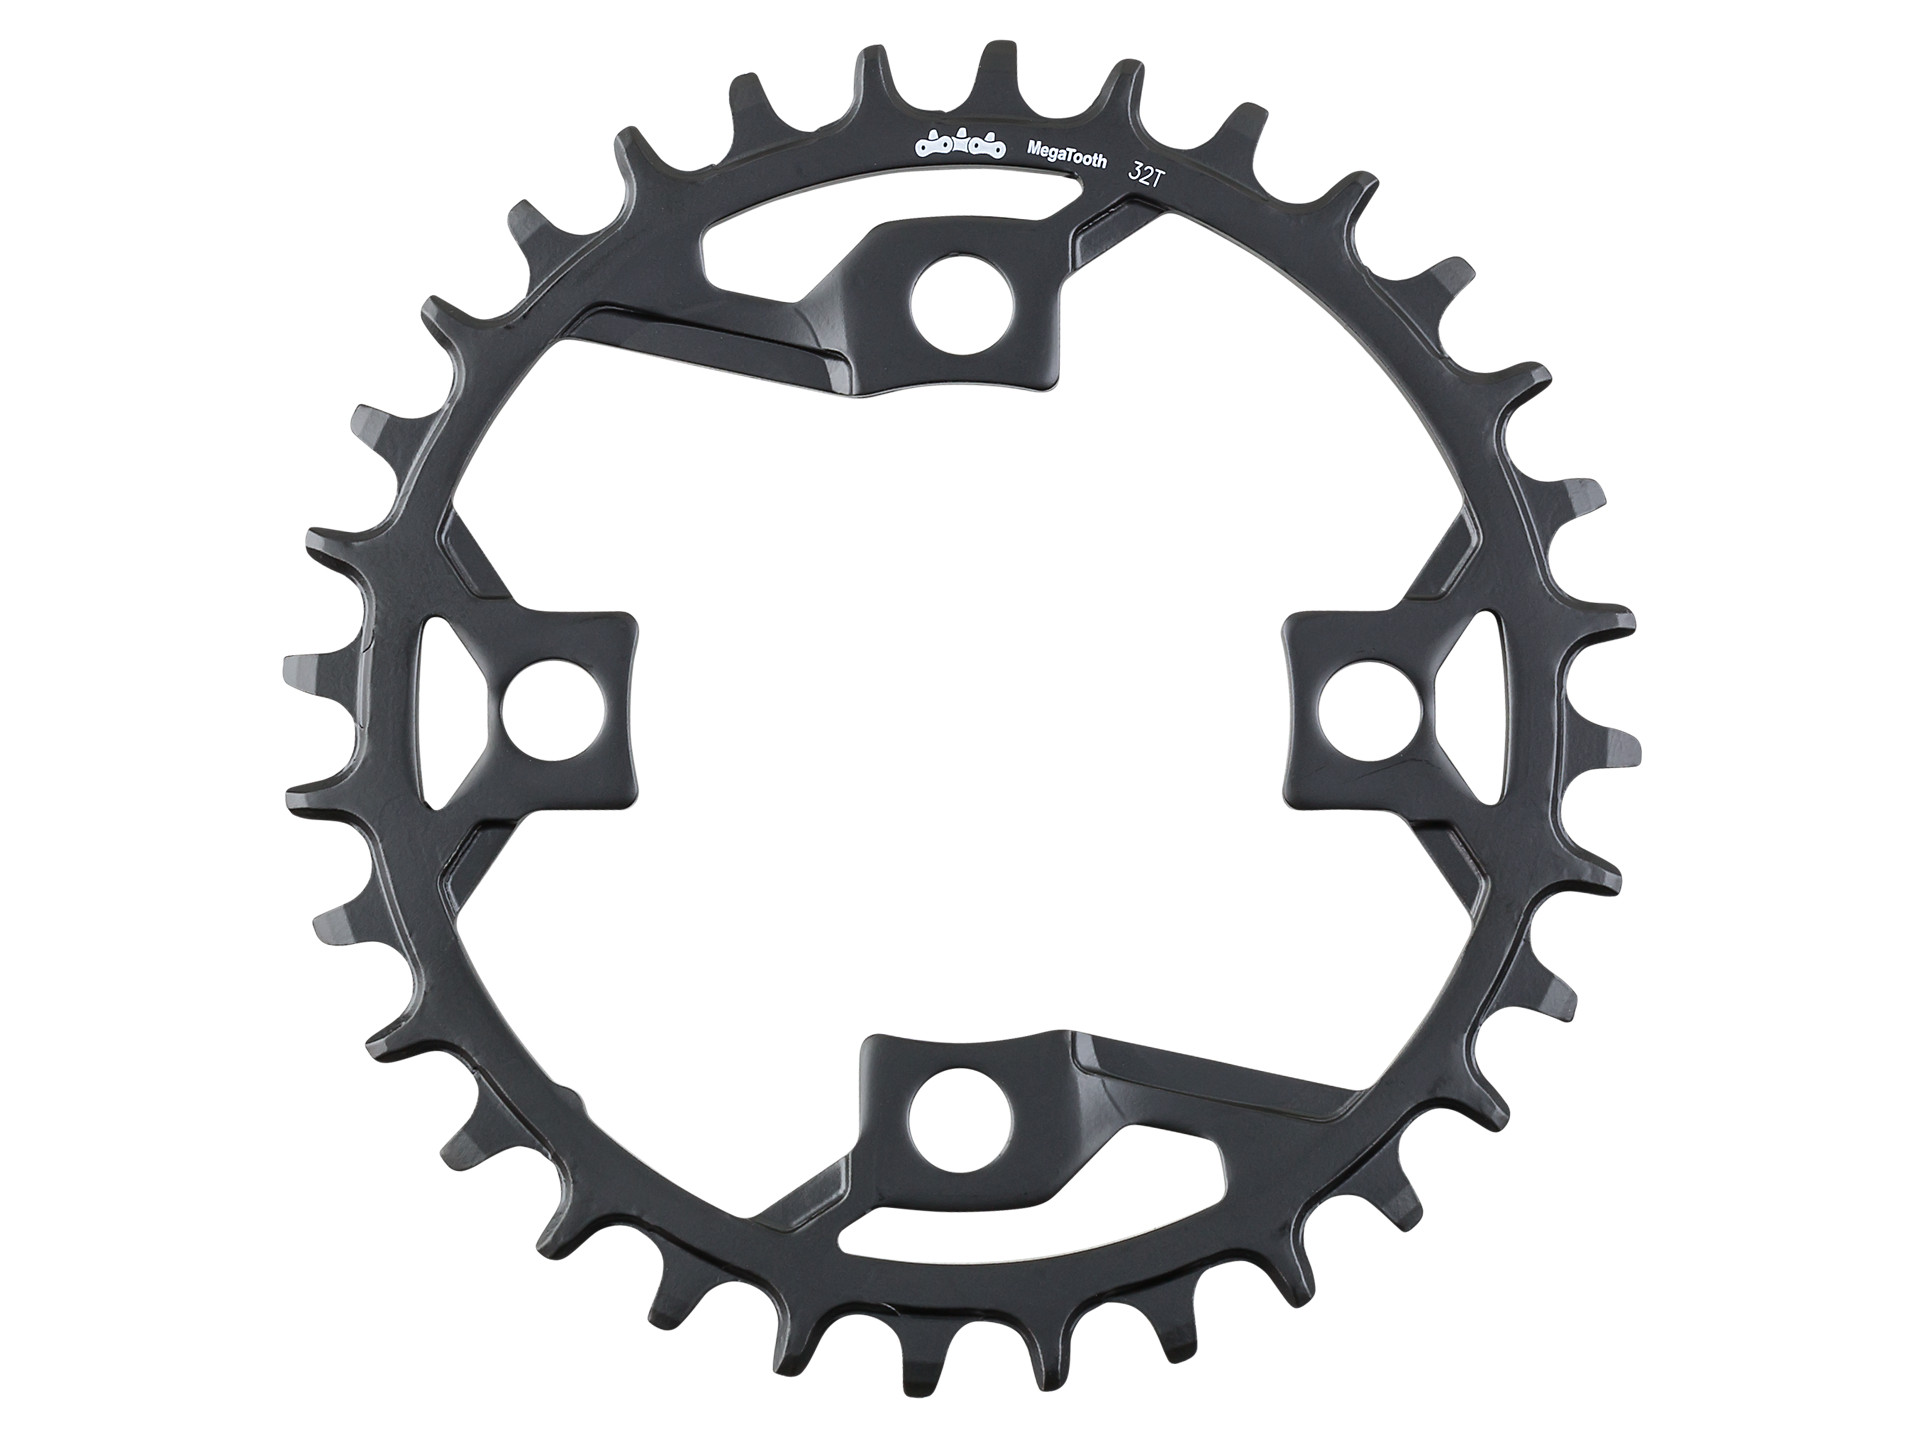 FSA Megatooth Replacement 1 x 11 Chainring 110BCD x 36t 